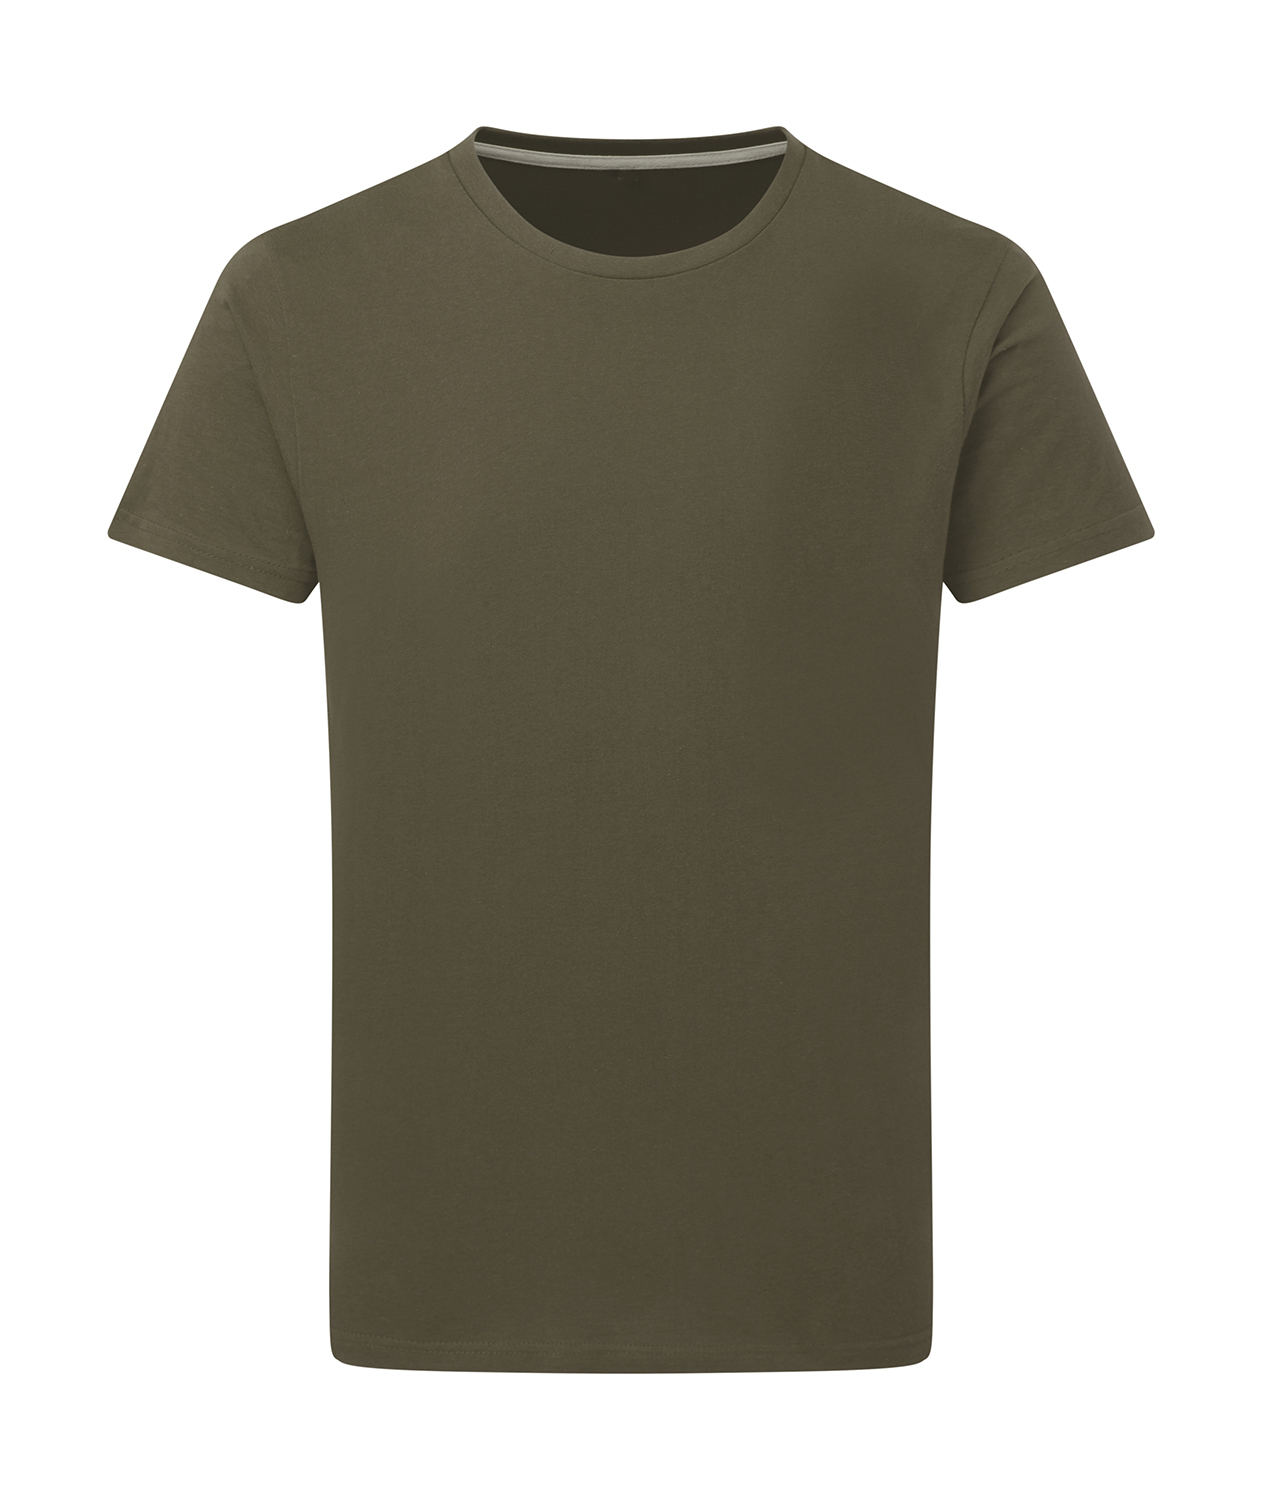 KAAMOULOXX ! Military Green